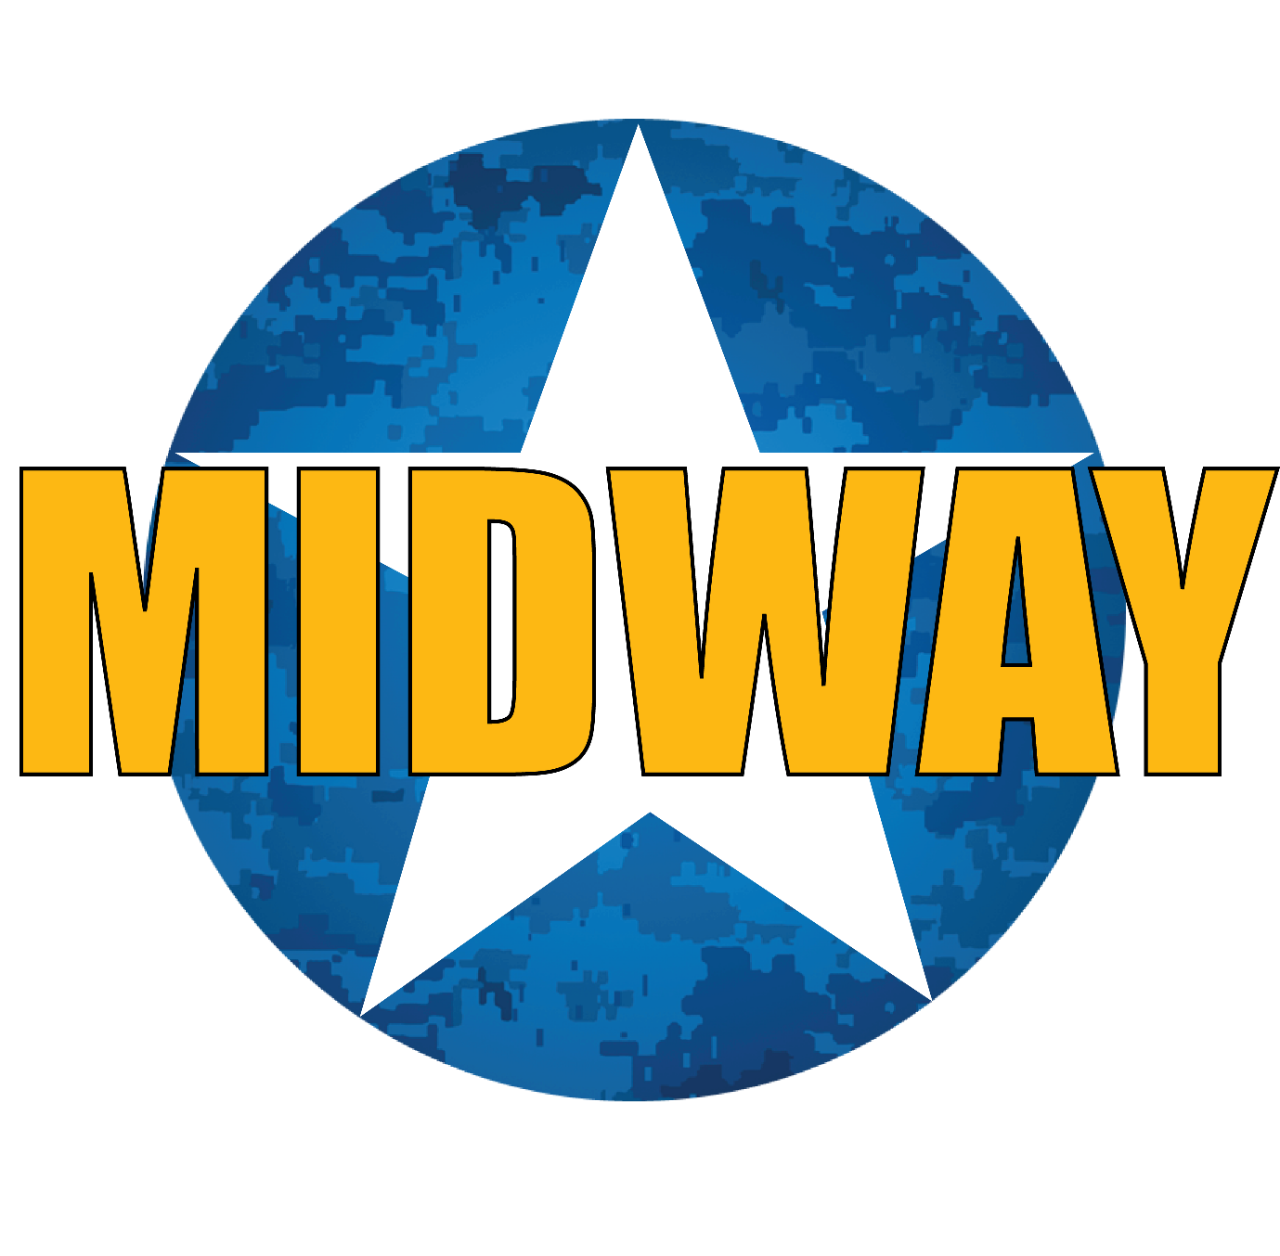 Battle of Midway logo